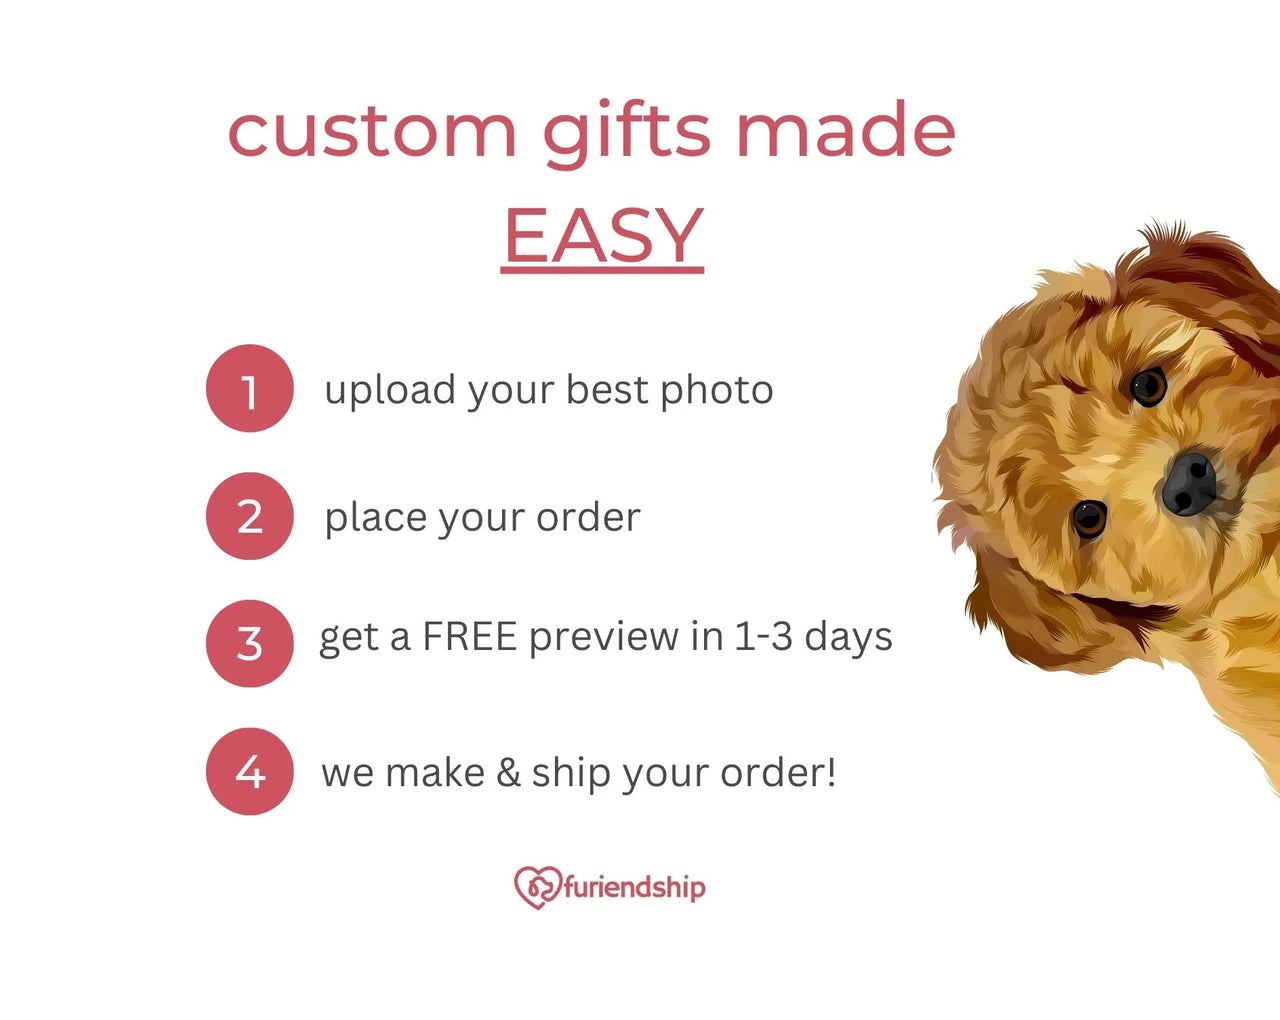 Custom gifts made easy at Furiendshipusa.com